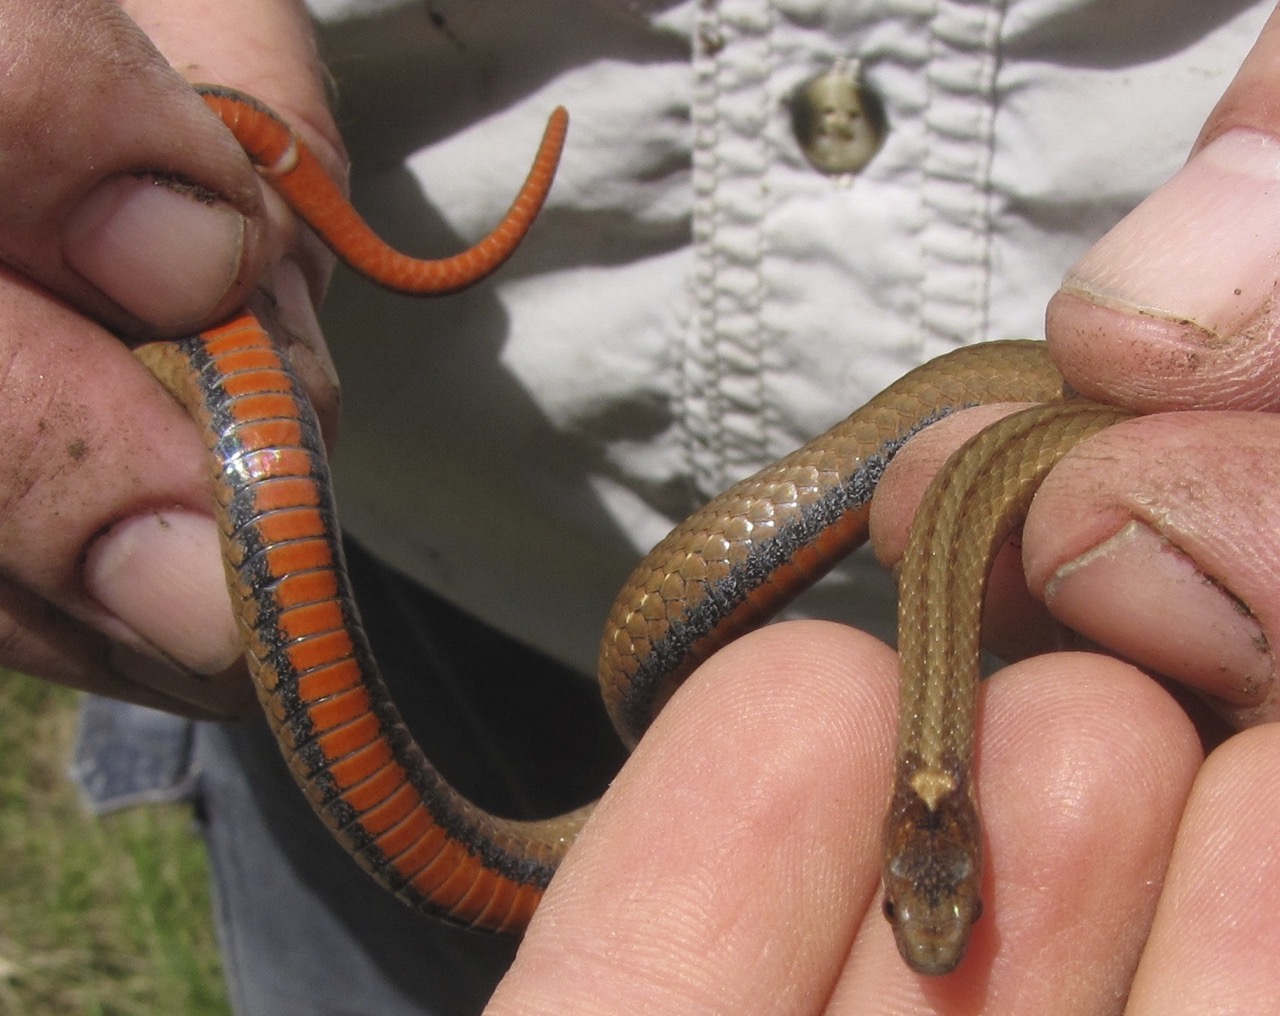 Storeria occipitomaculata – Red-bellied Snake